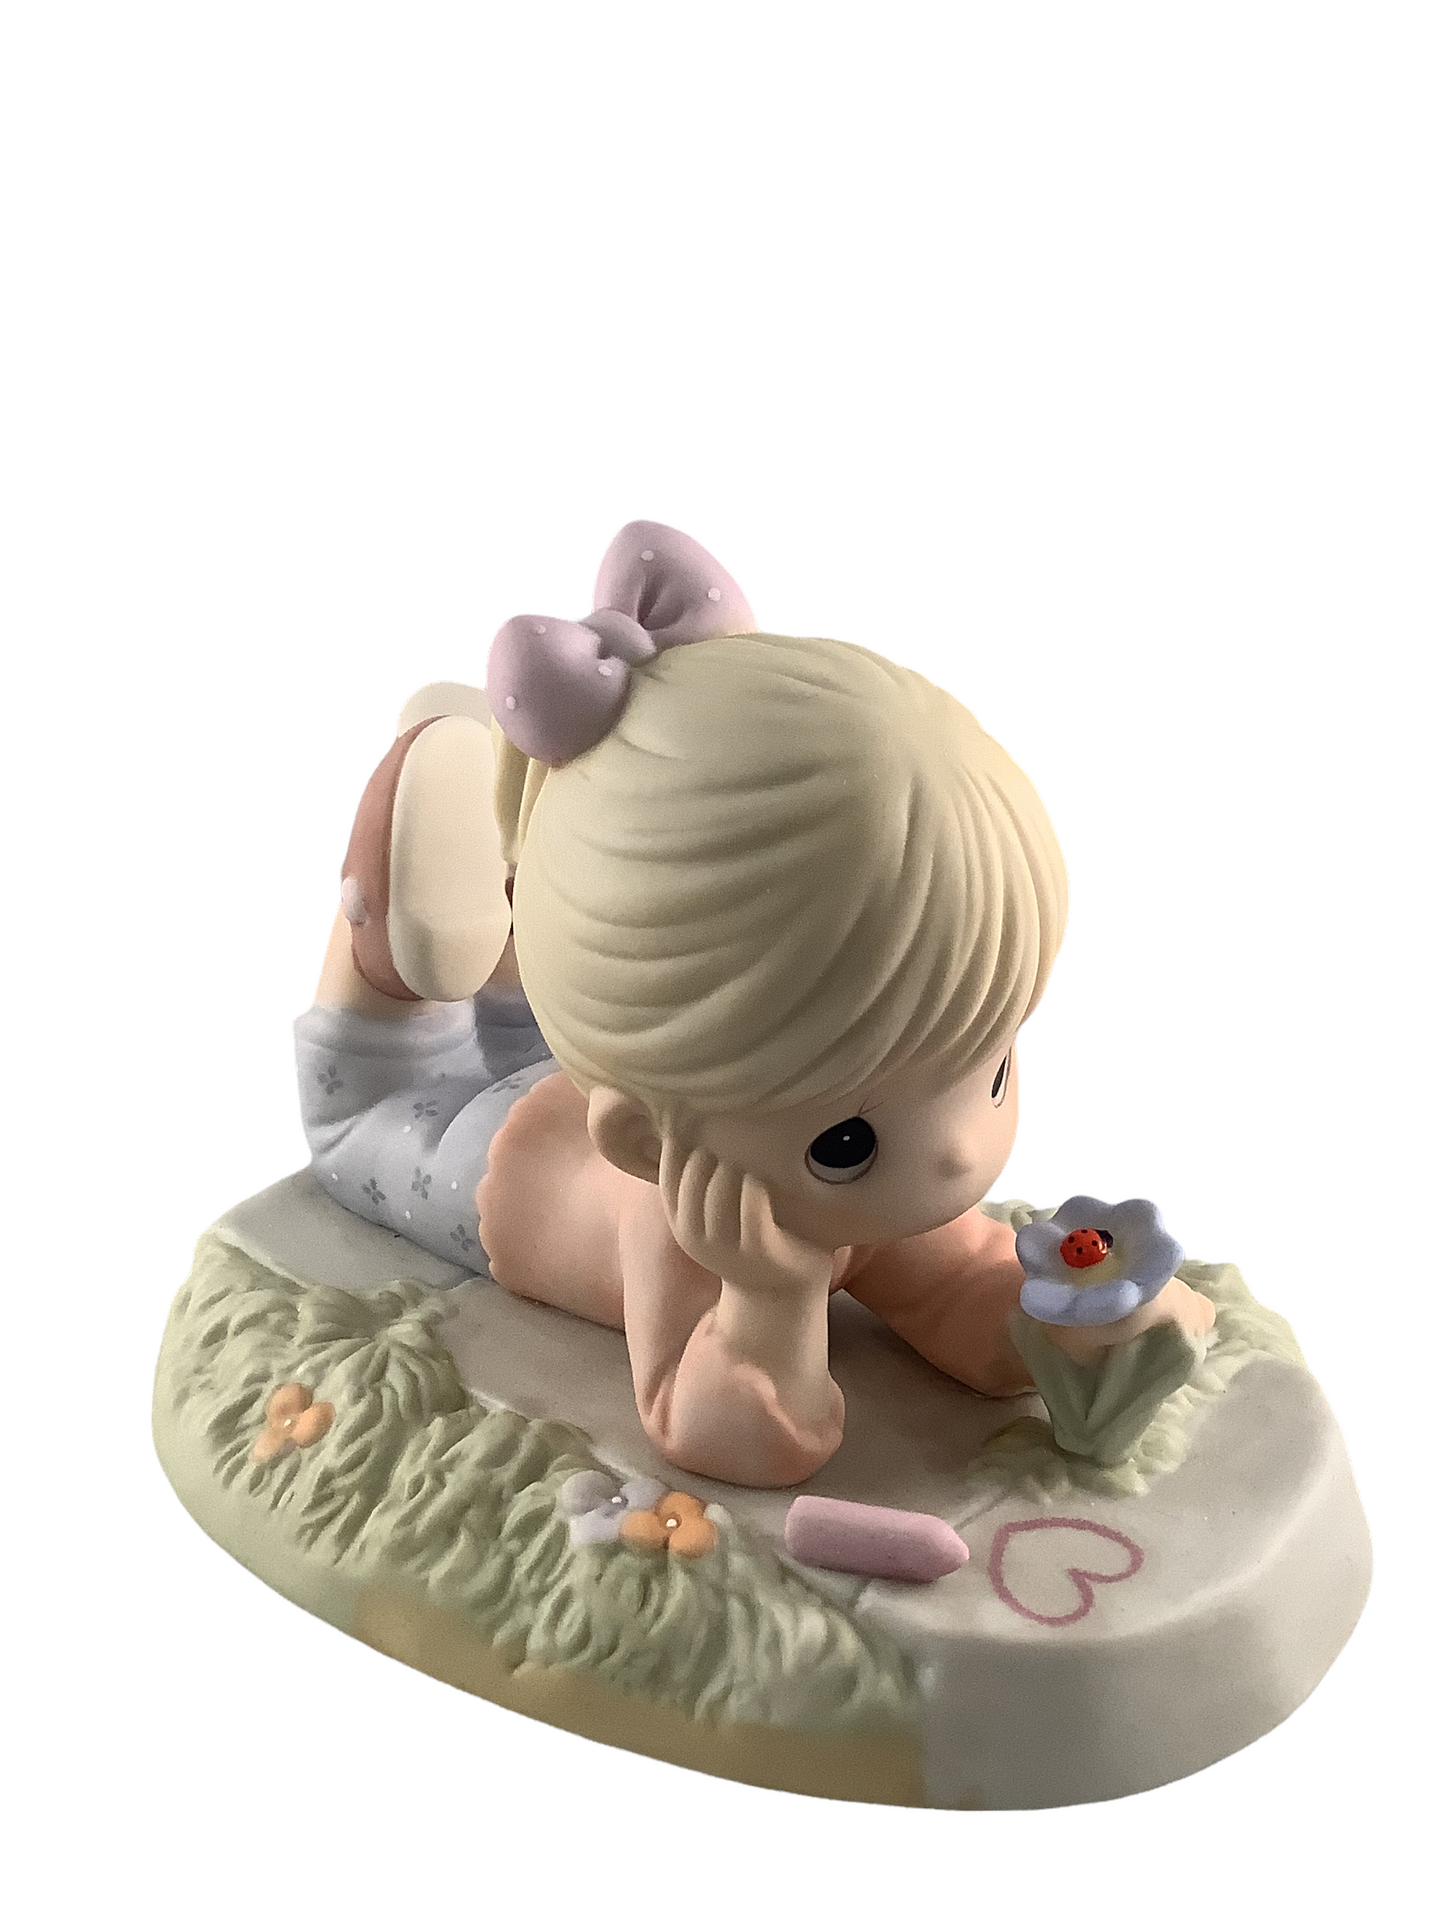 Blessed With Small Miracles - Precious Moment Figurine